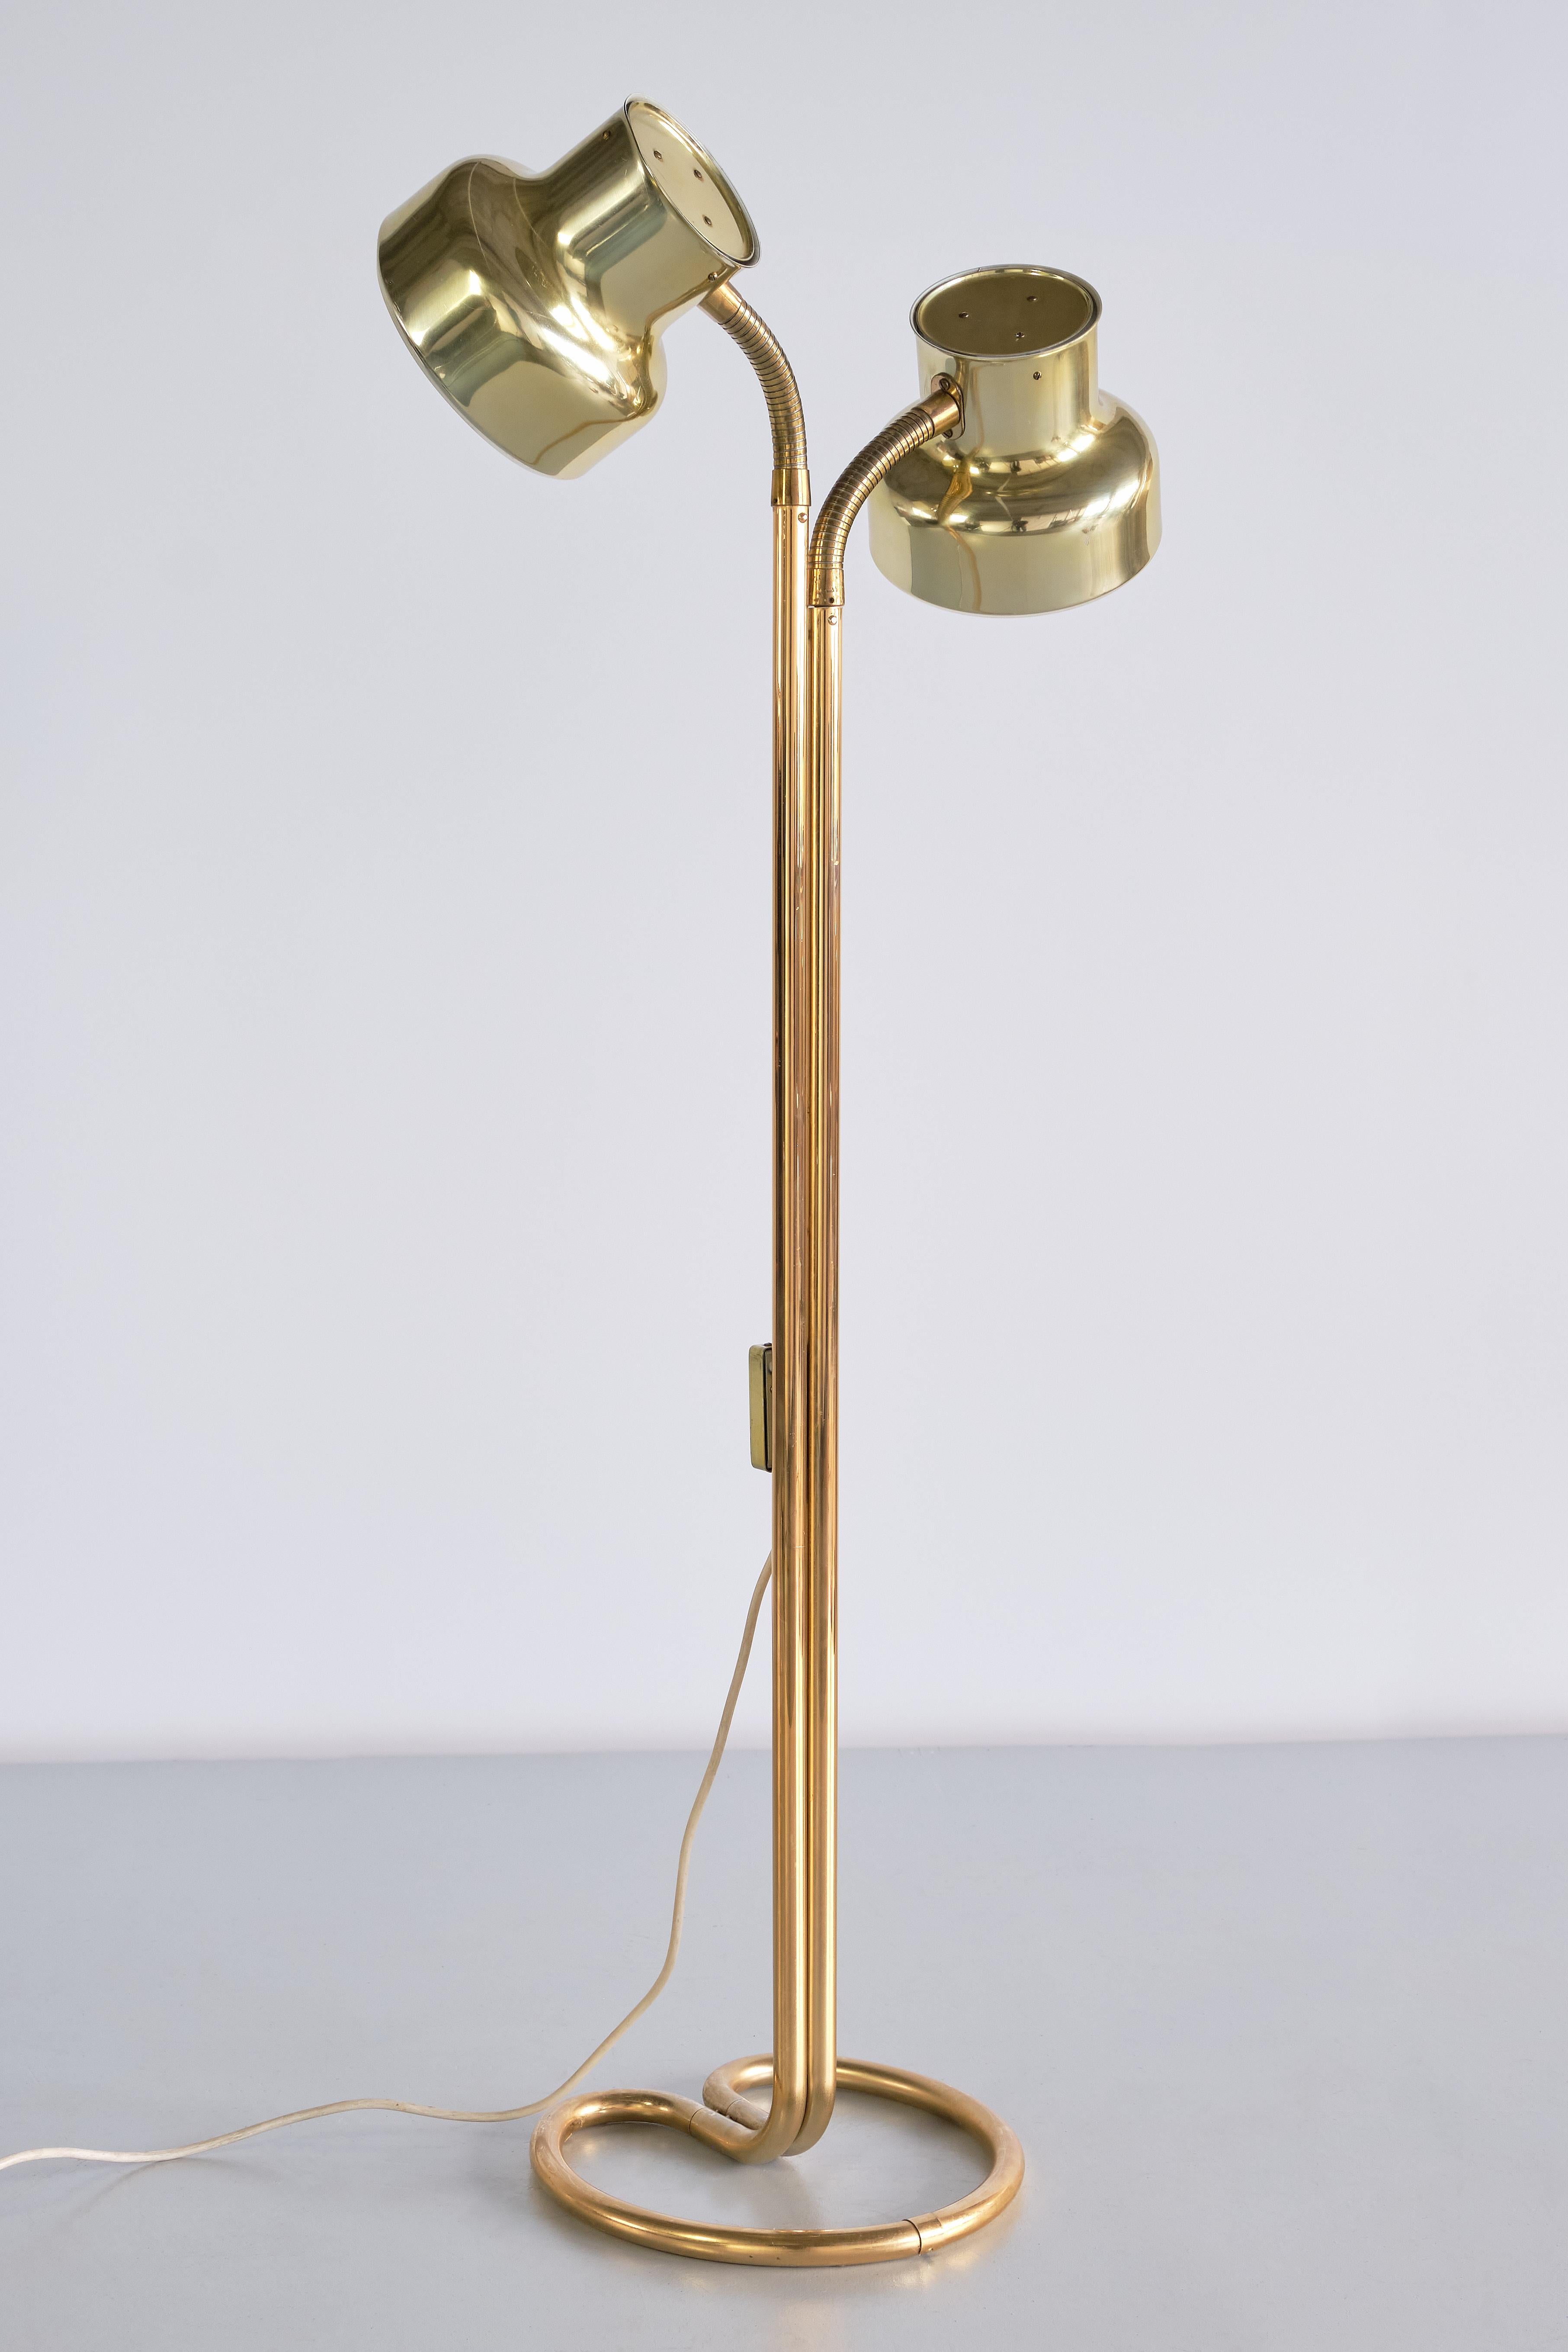 Anders Pehrson 'Bumling' Floor Lamp in Brass, Atelje Lyktan, Sweden, 1968 In Good Condition For Sale In The Hague, NL